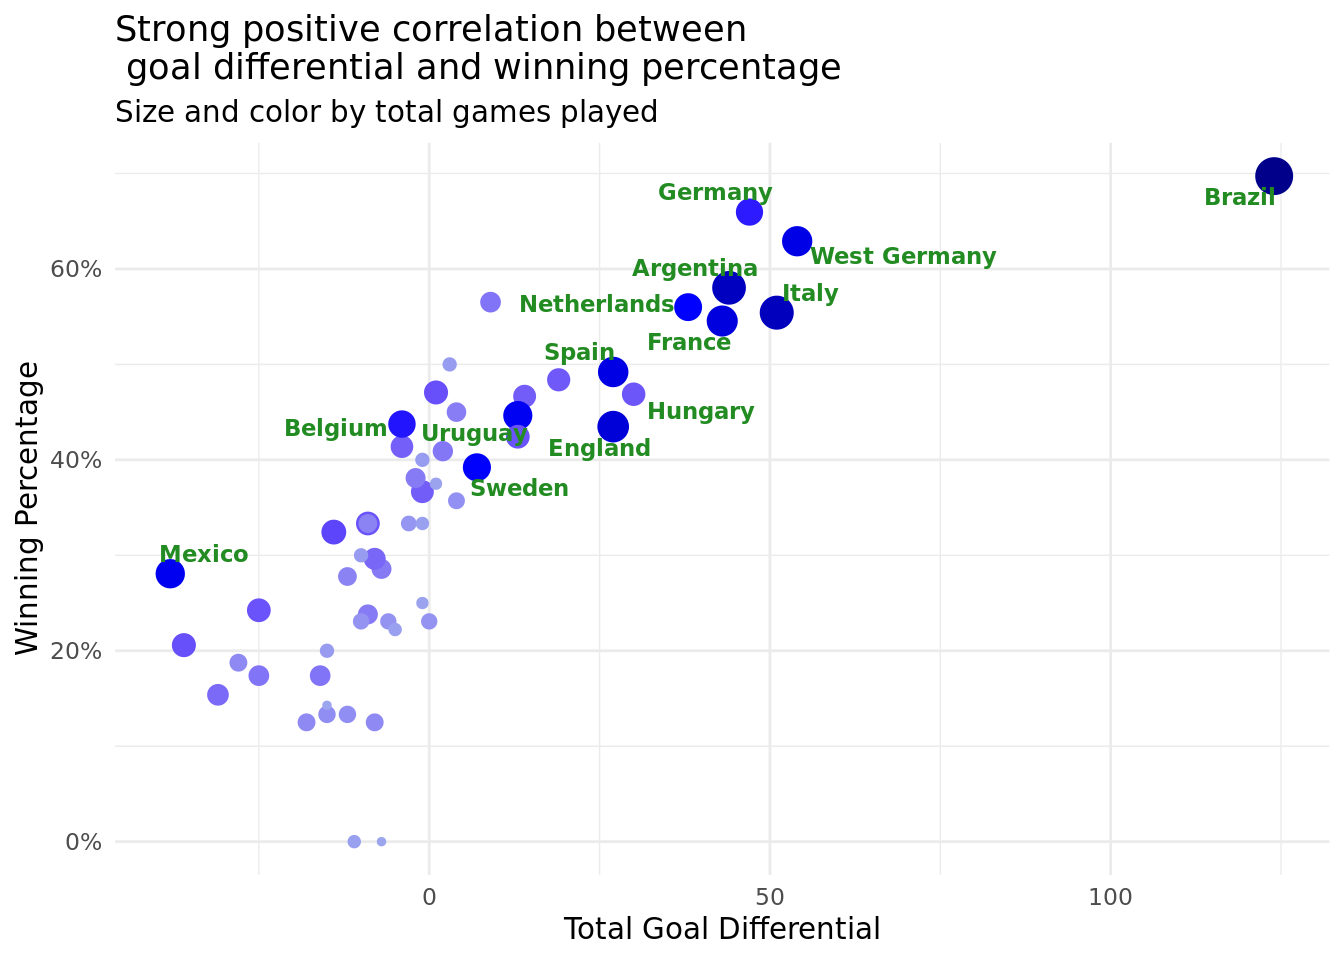 Strong positive correlation between goal differential and winning percentage.